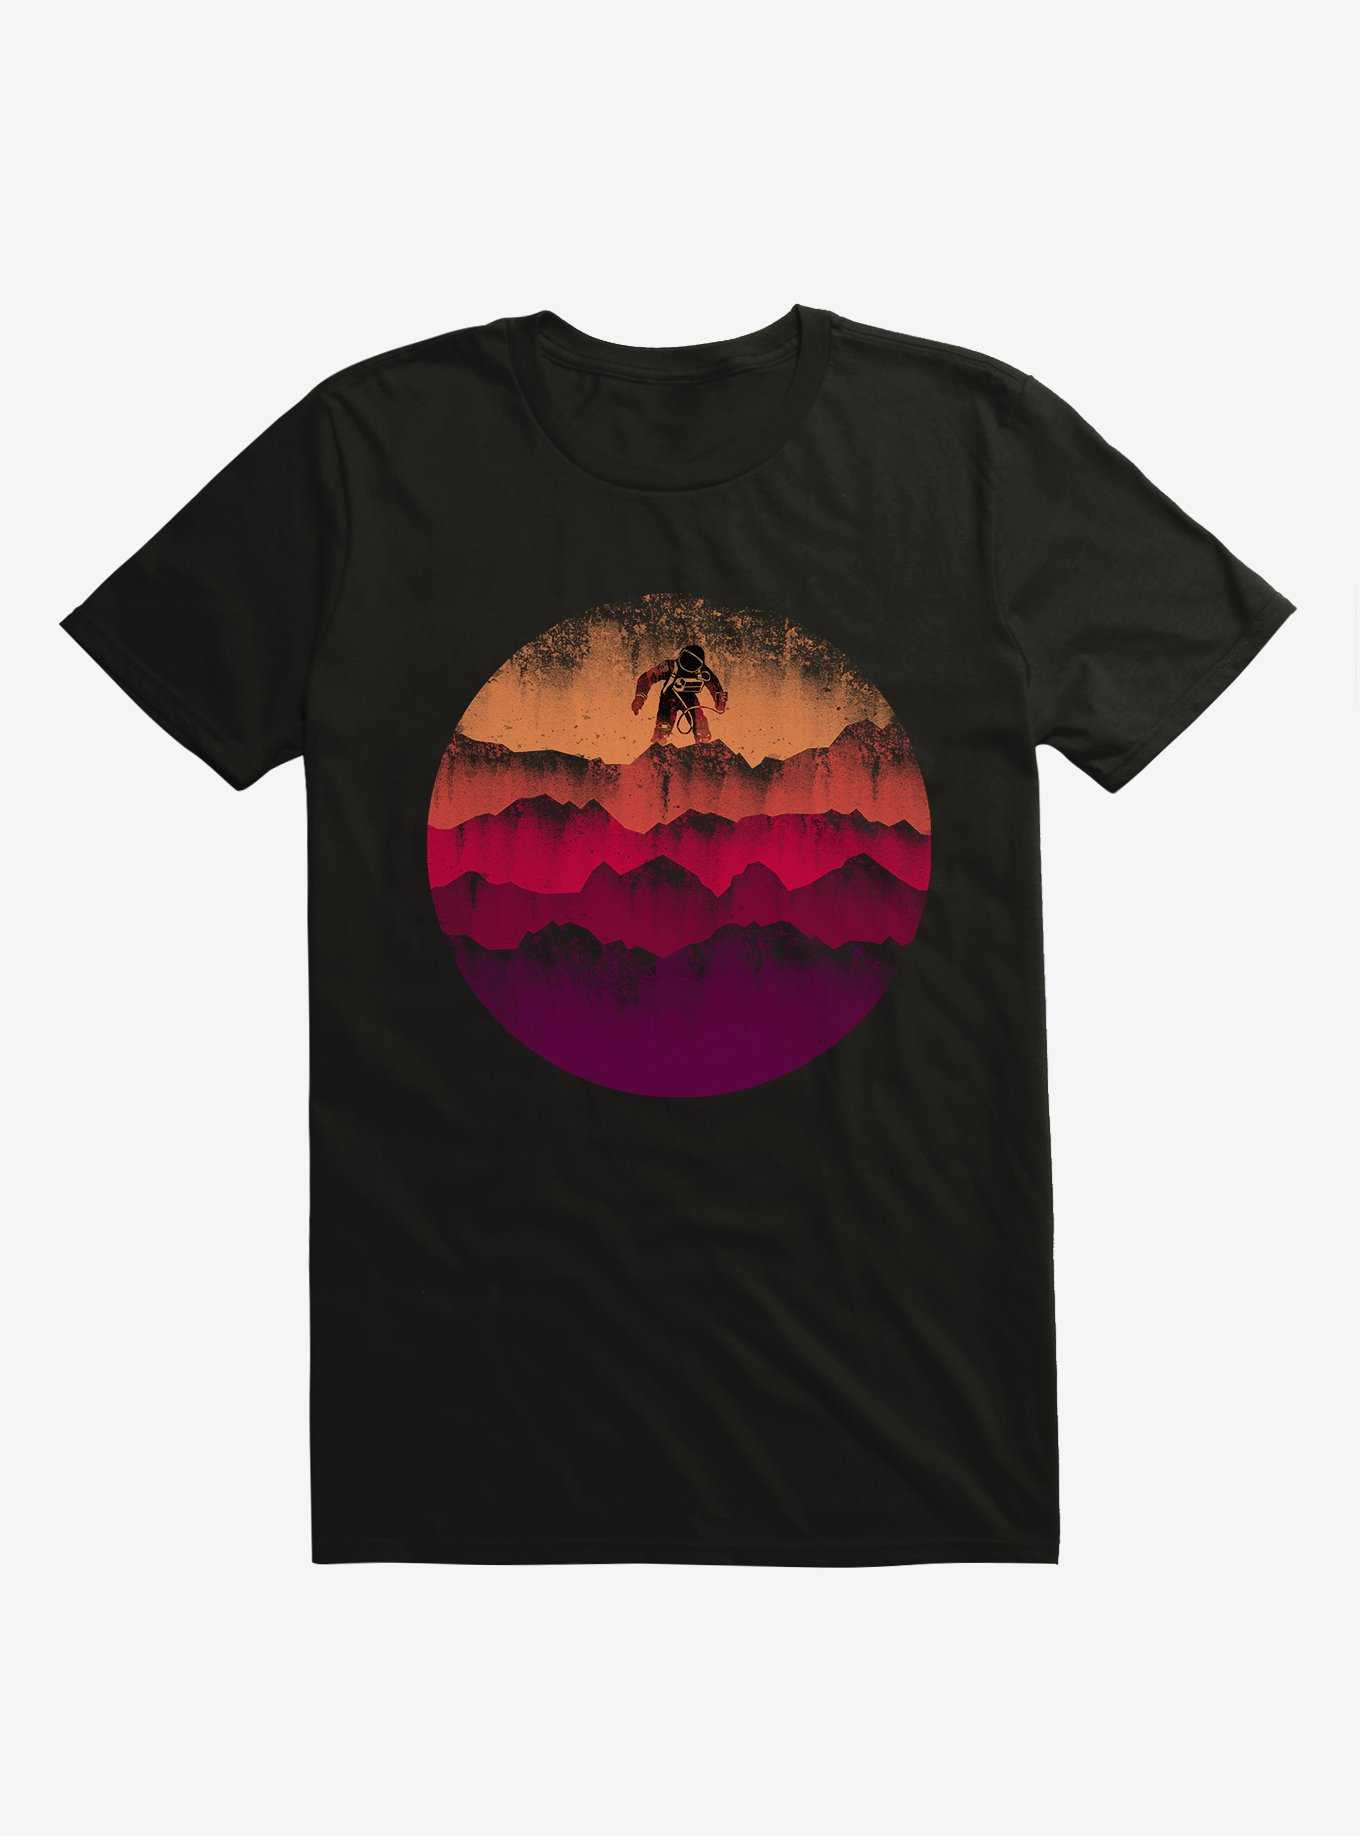 A Scene From Mars Astronaut Black T-Shirt, , hi-res